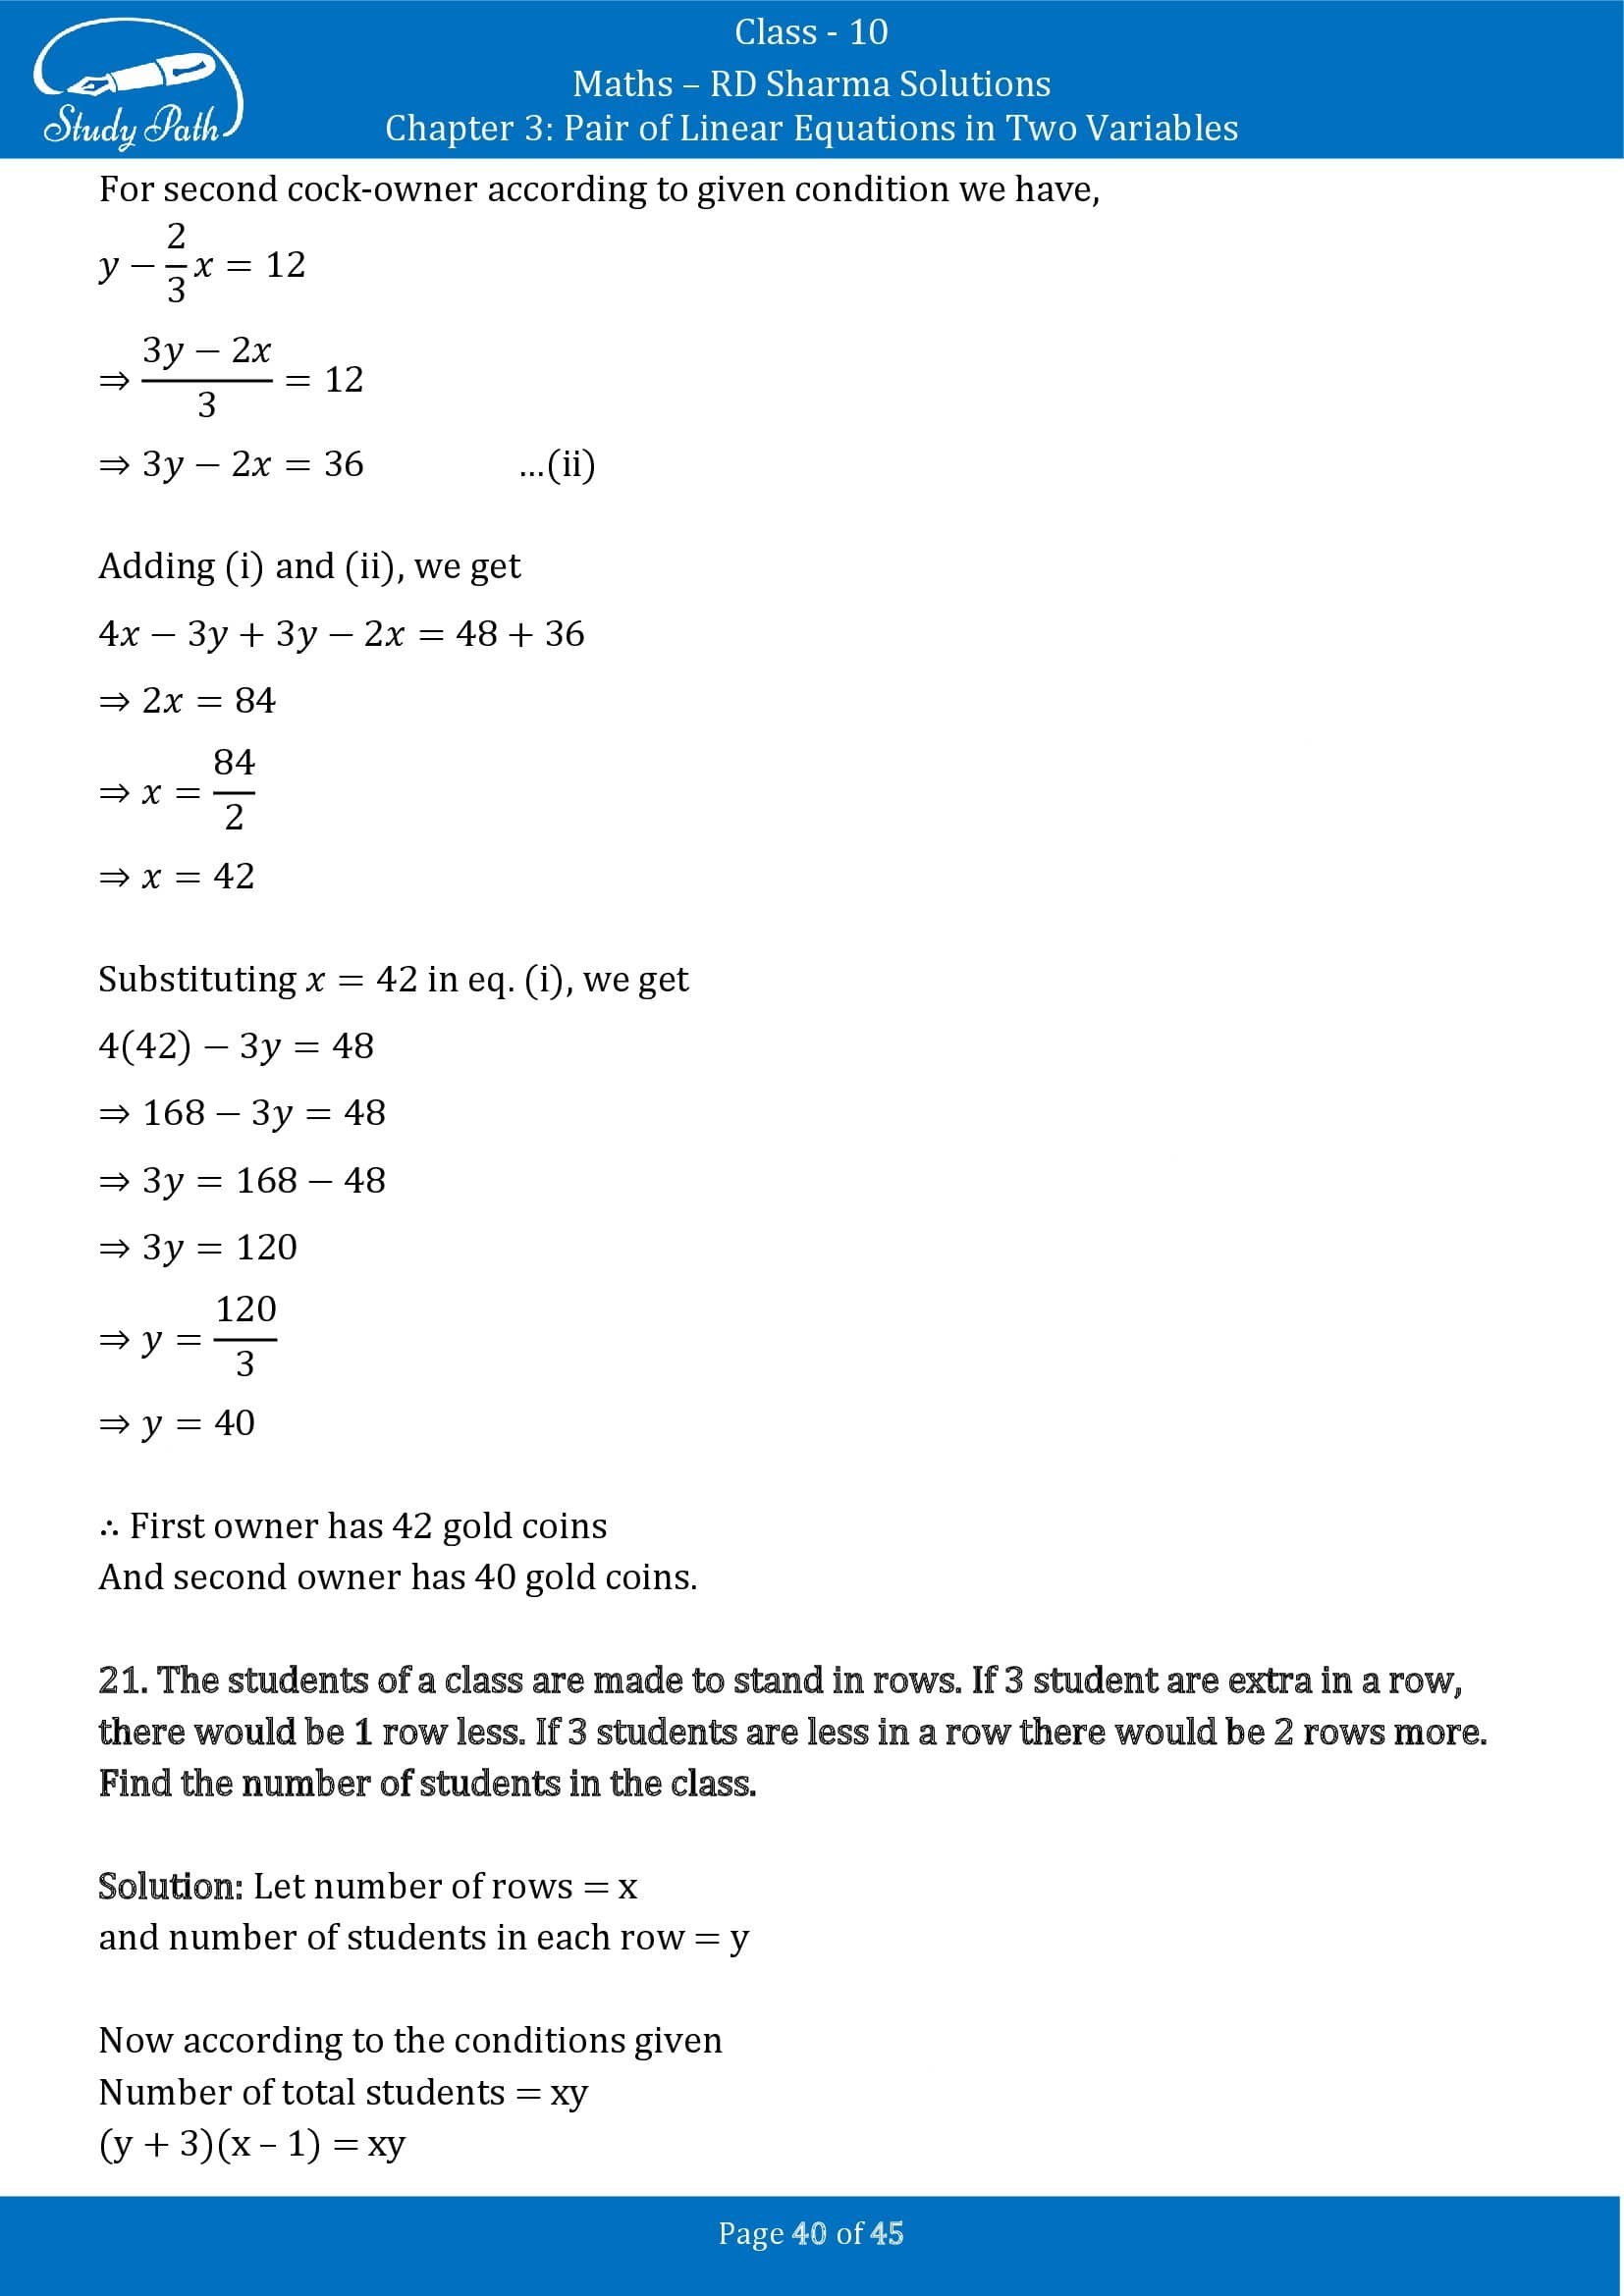 RD Sharma Solutions Class 10 Chapter 3 Pair of Linear Equations in Two Variables Exercise 3.11 00040